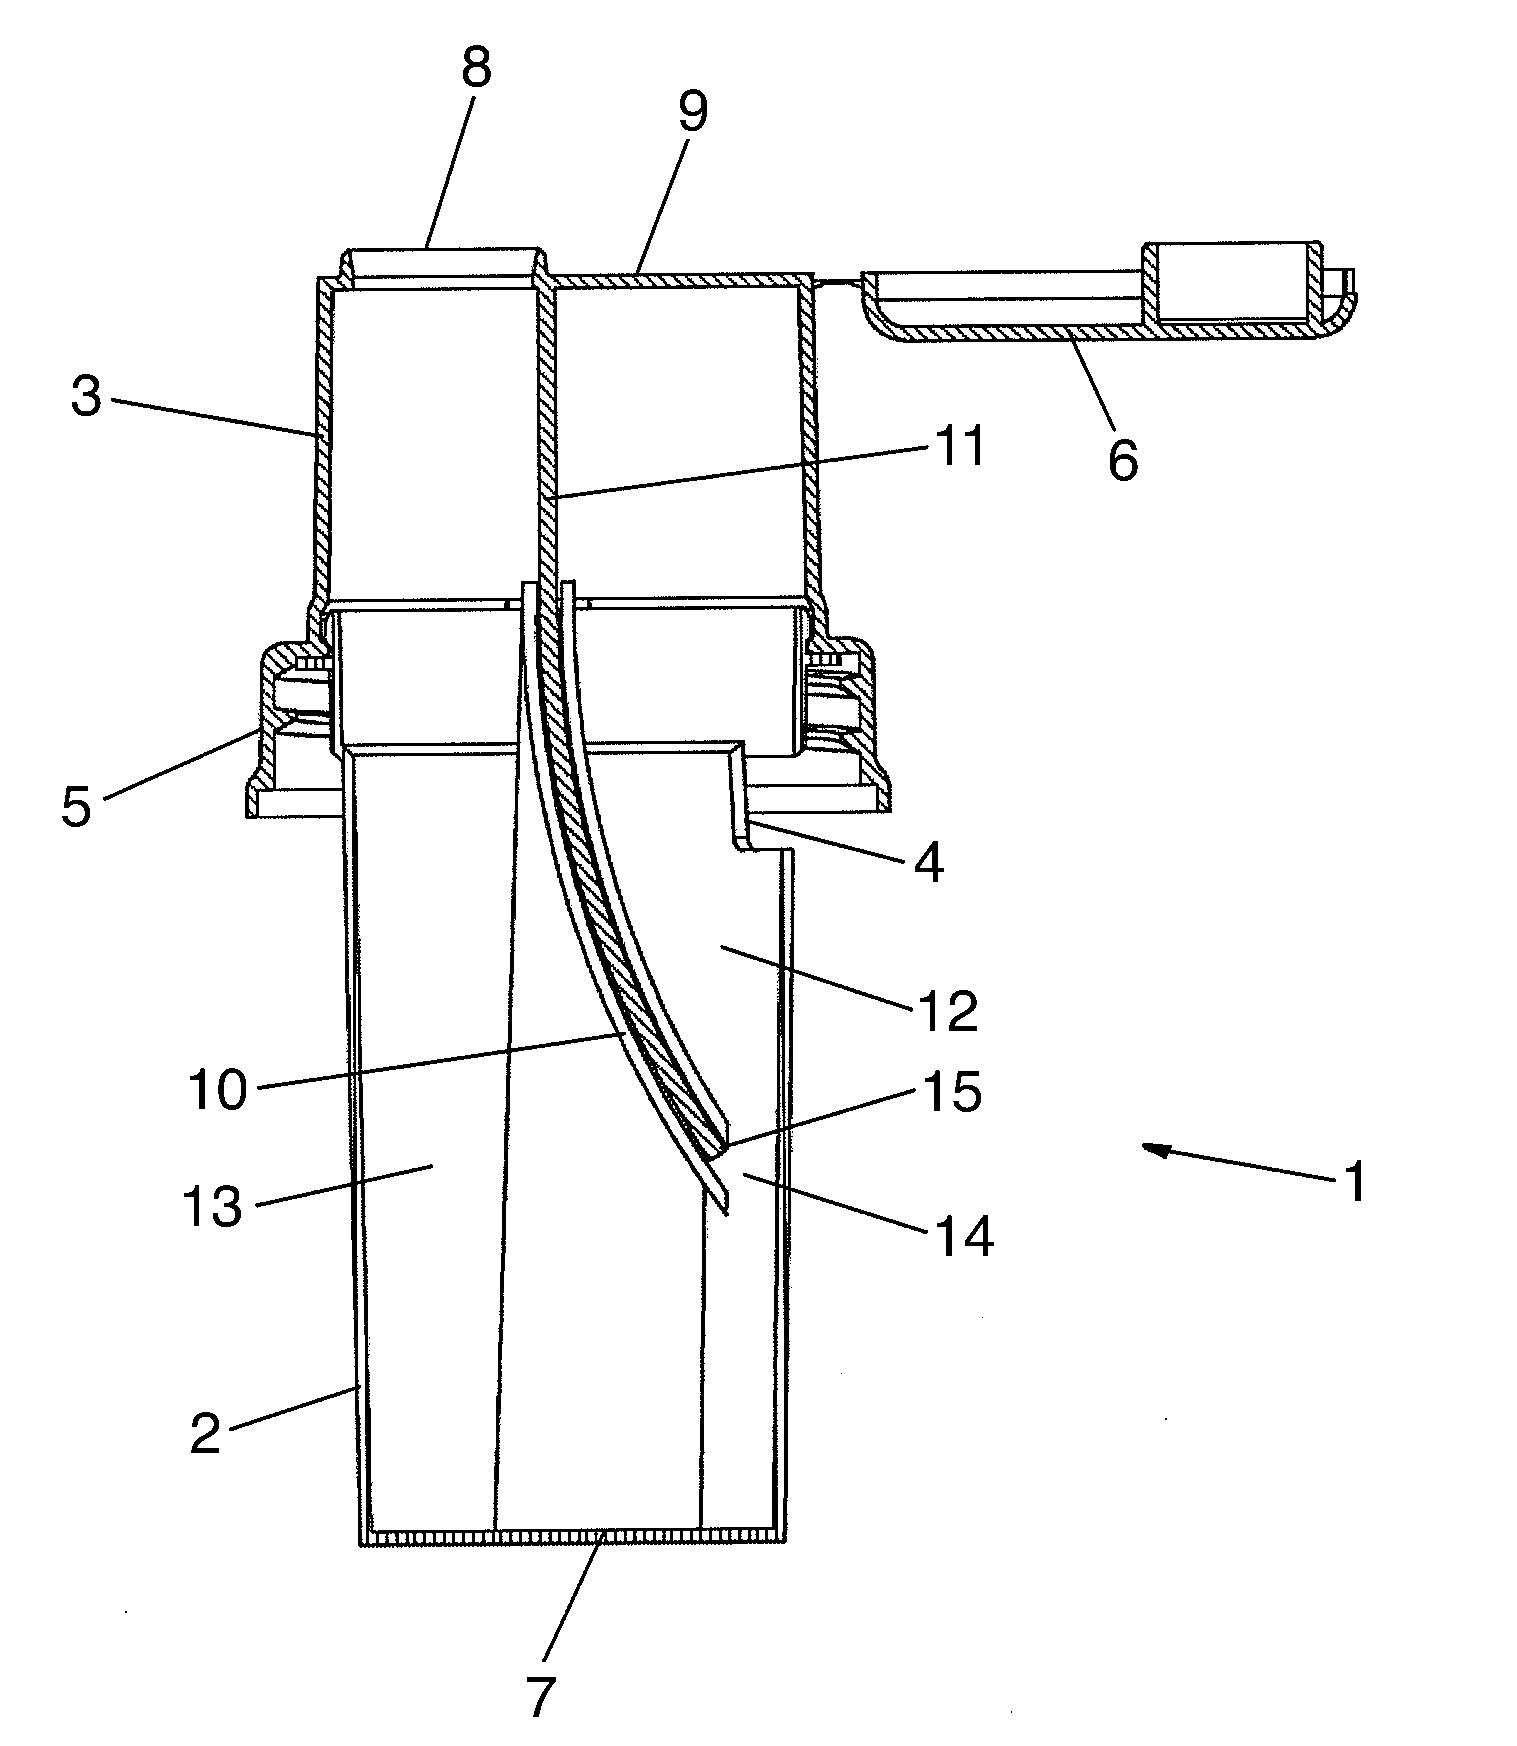 Dispensing device for dispensing a liquid product